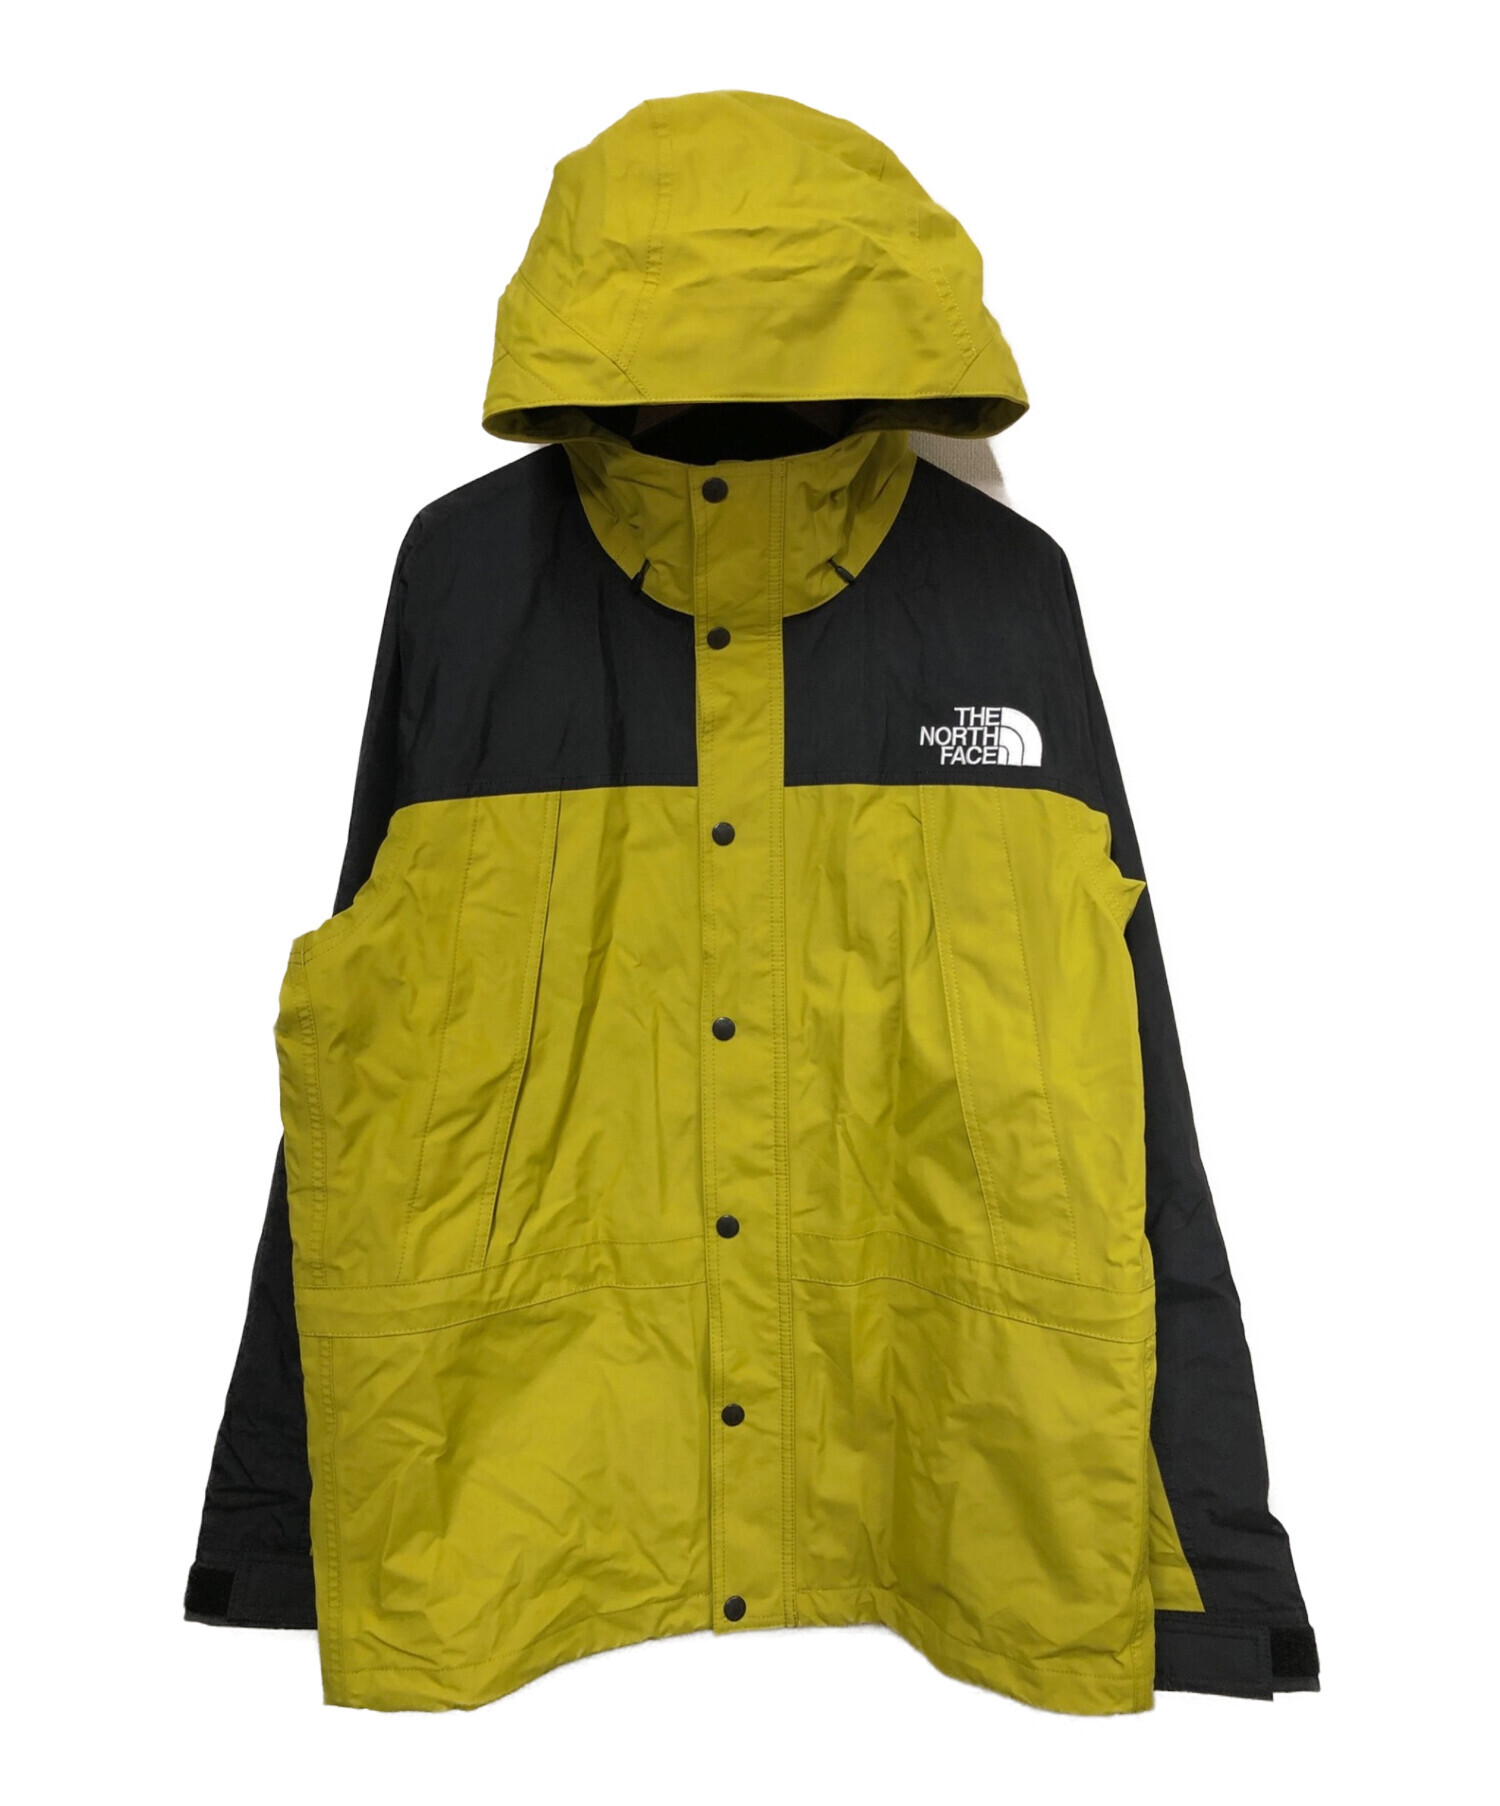 THE NORTH FACE マウンテンライト イエロー-